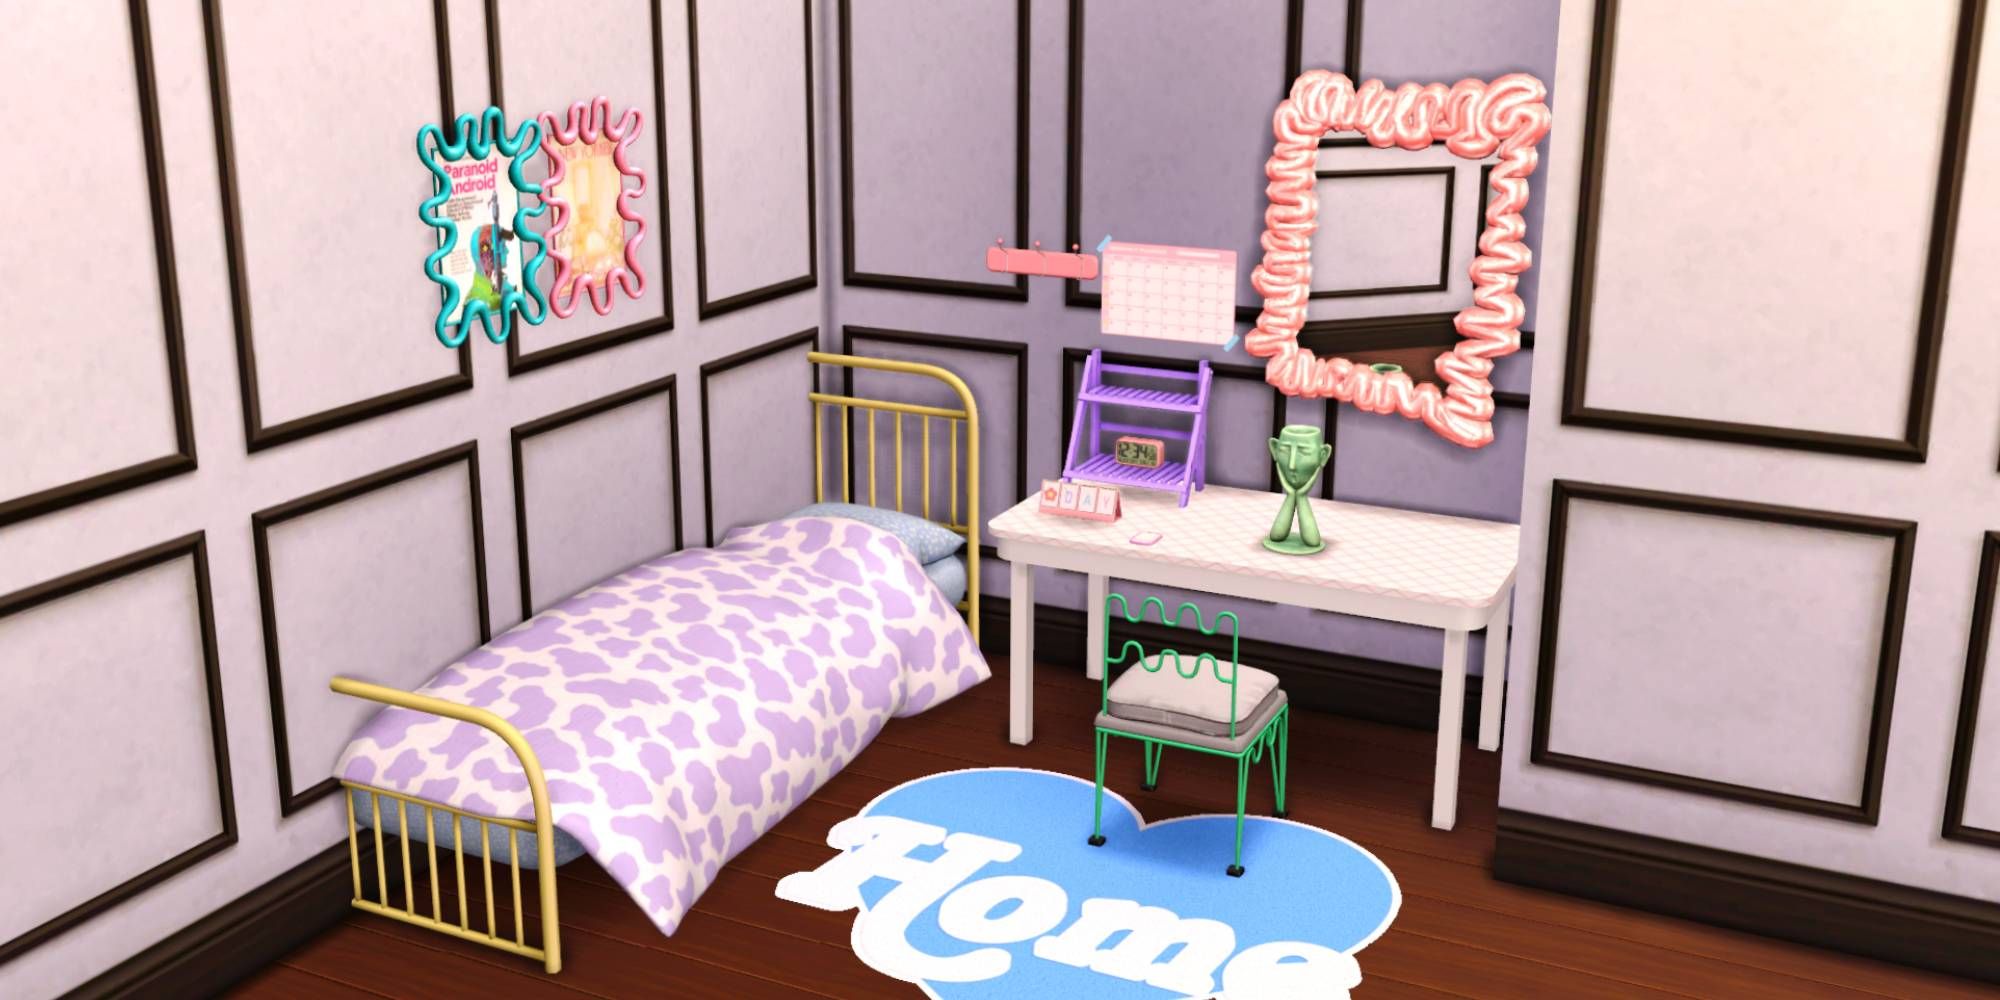 A pastel colored bedroom showing off the CC packs